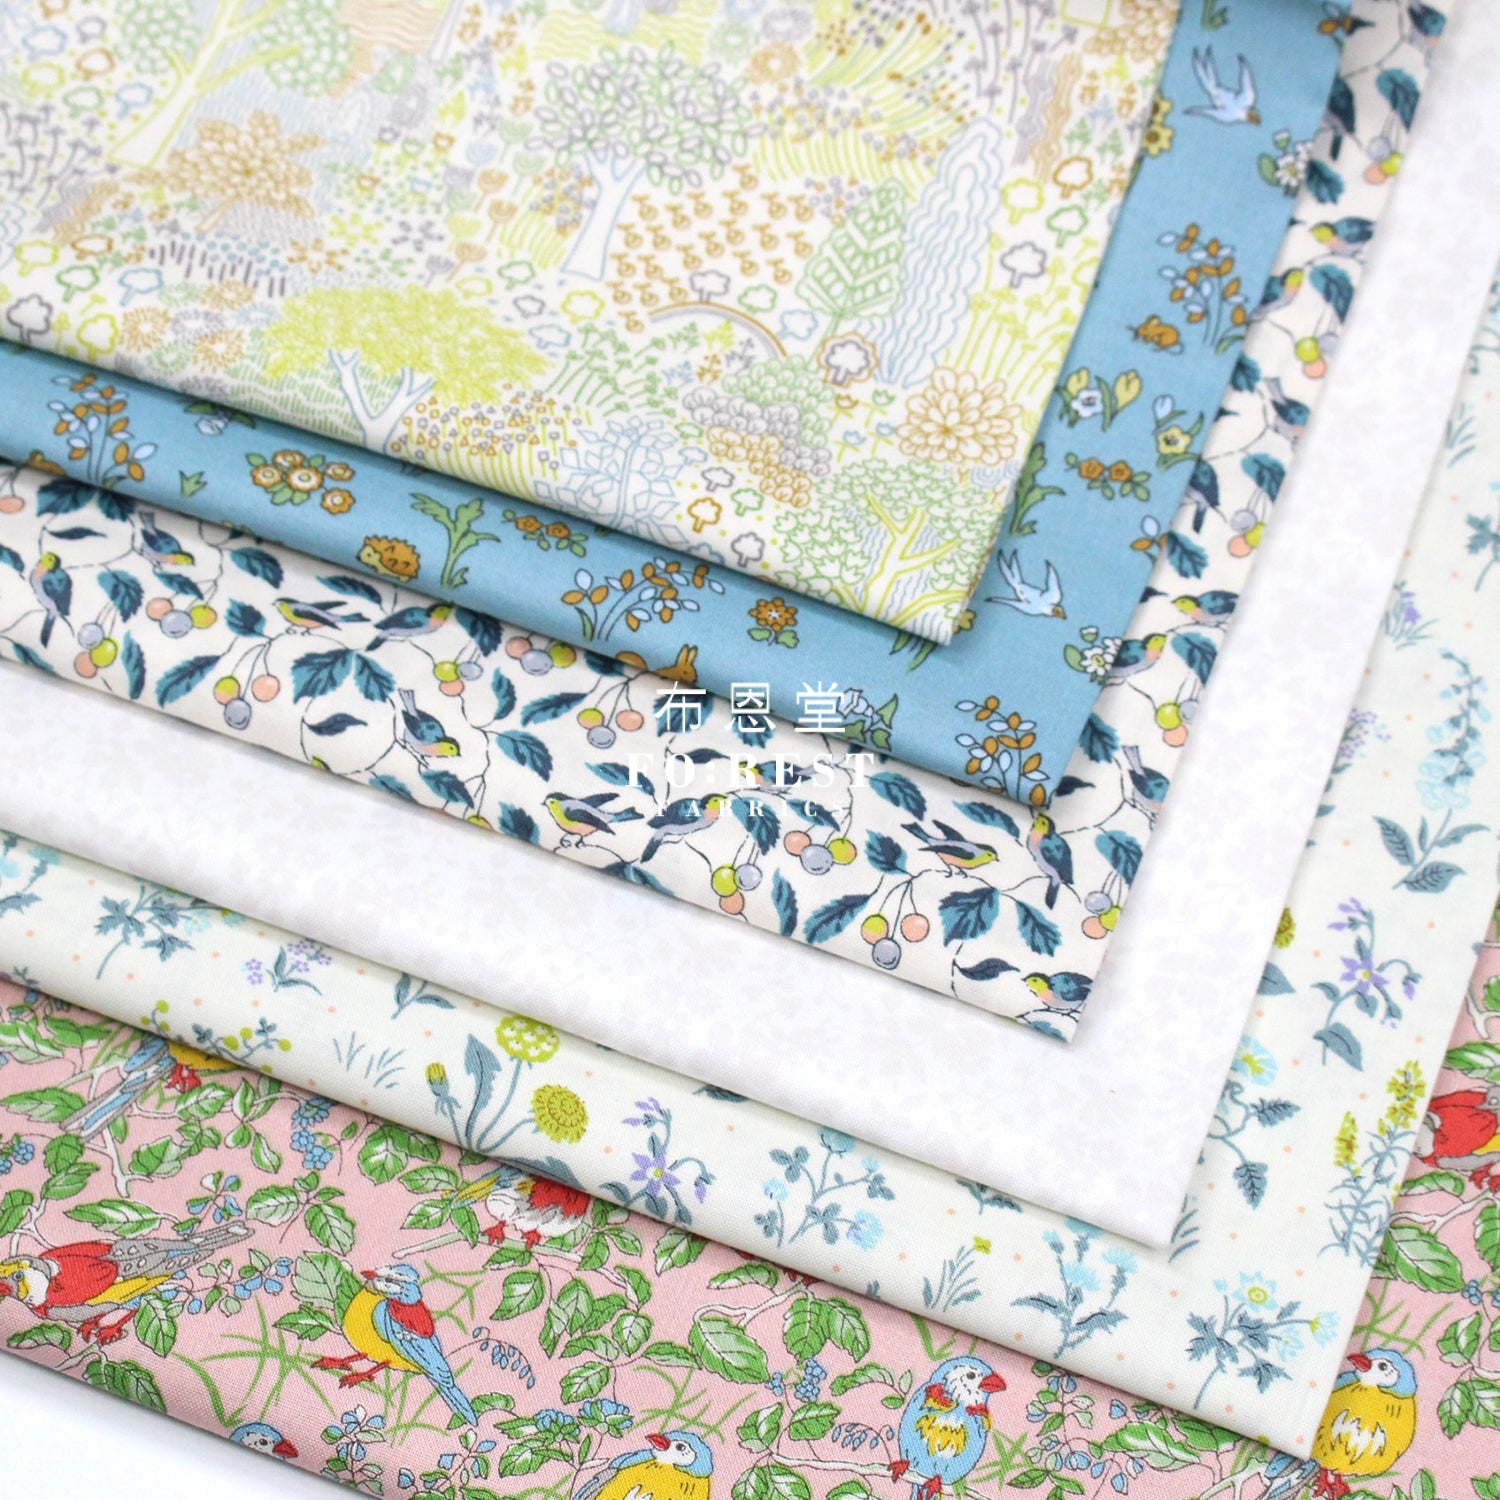 Quilting Liberty - Autumn Meadow A Lasenby Cotton